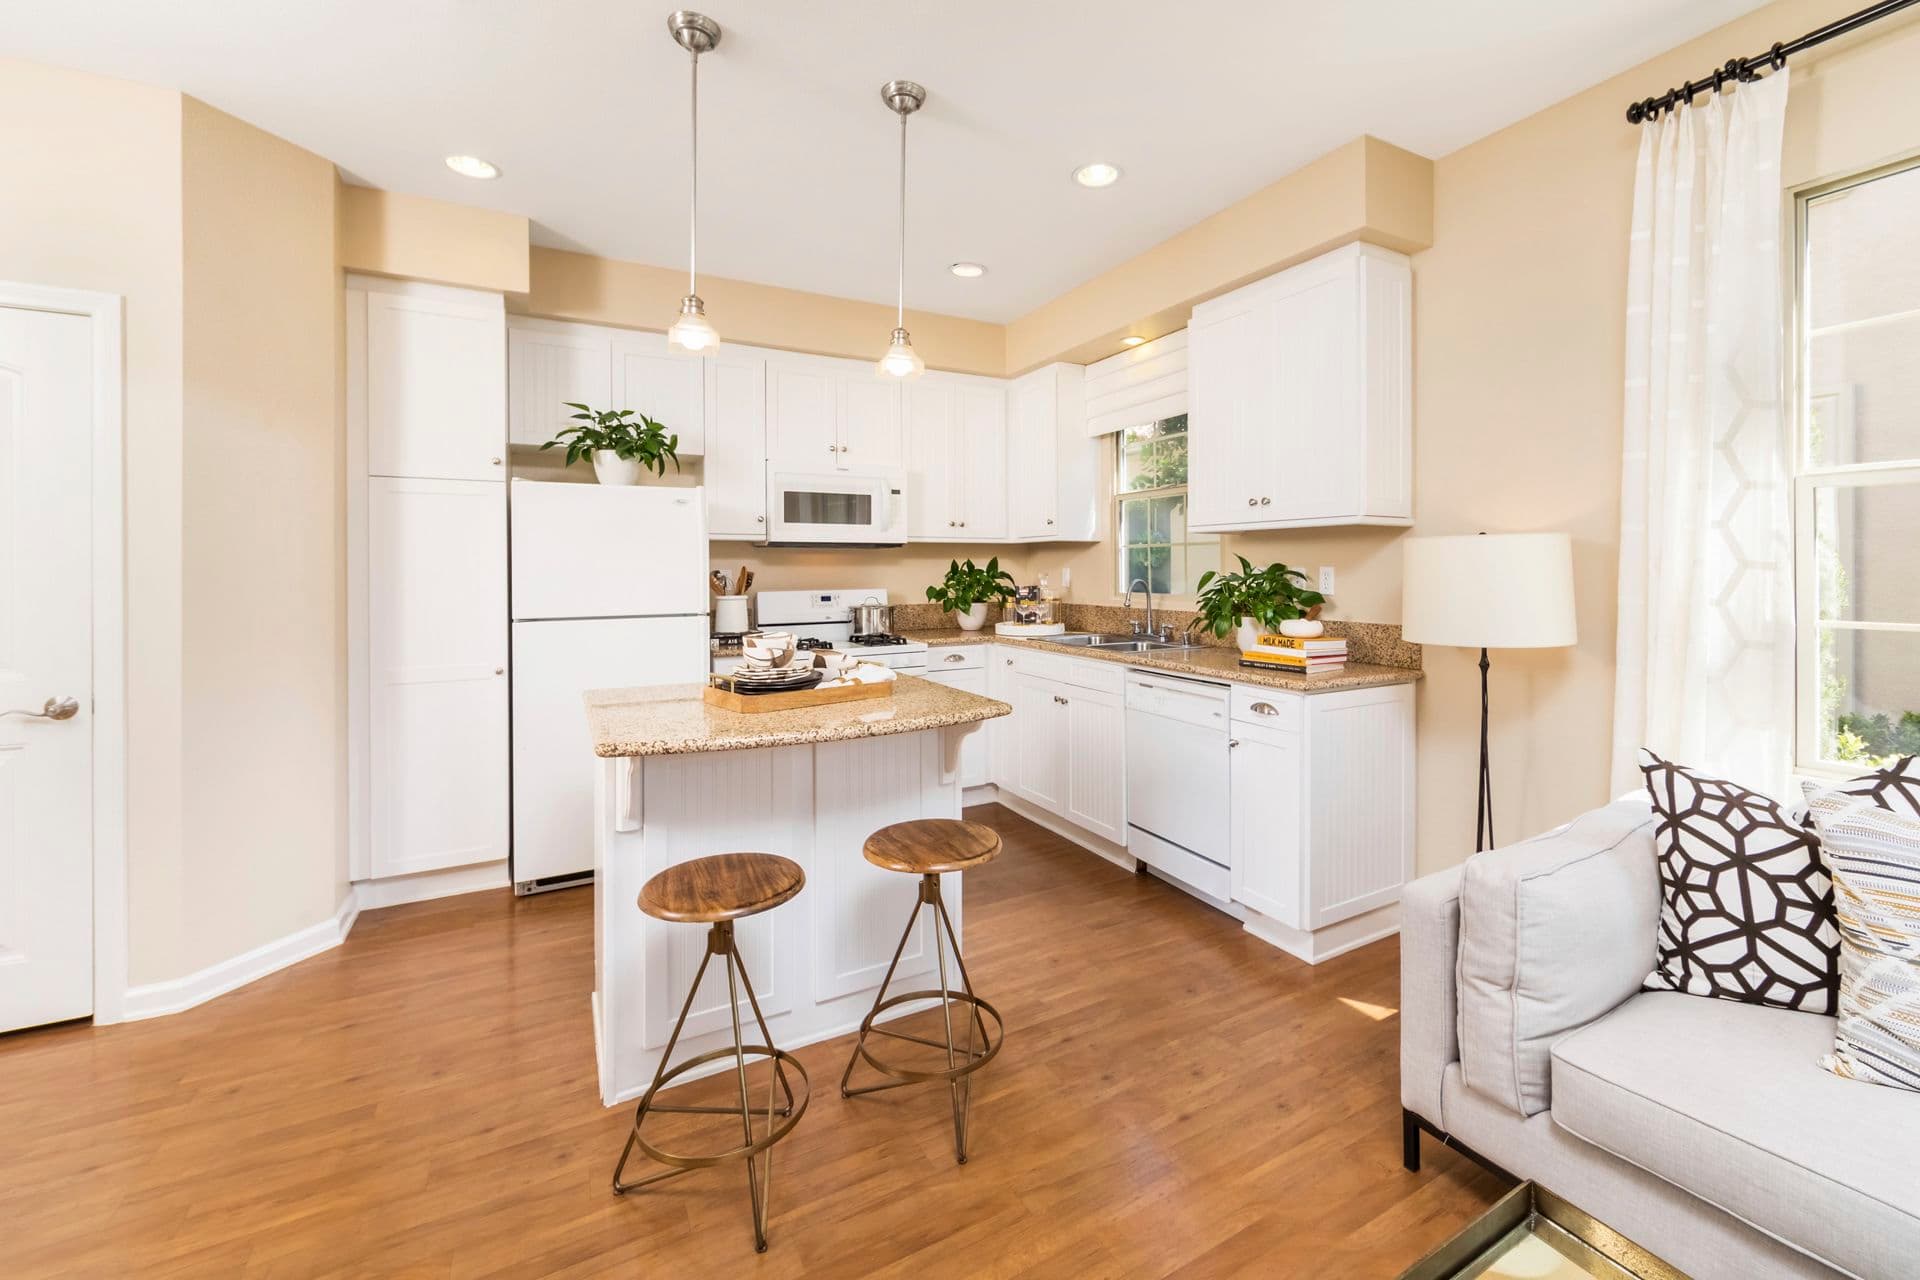 Interior view of kitchen at Woodbury Place Apartment Homes in Irvine, CA.